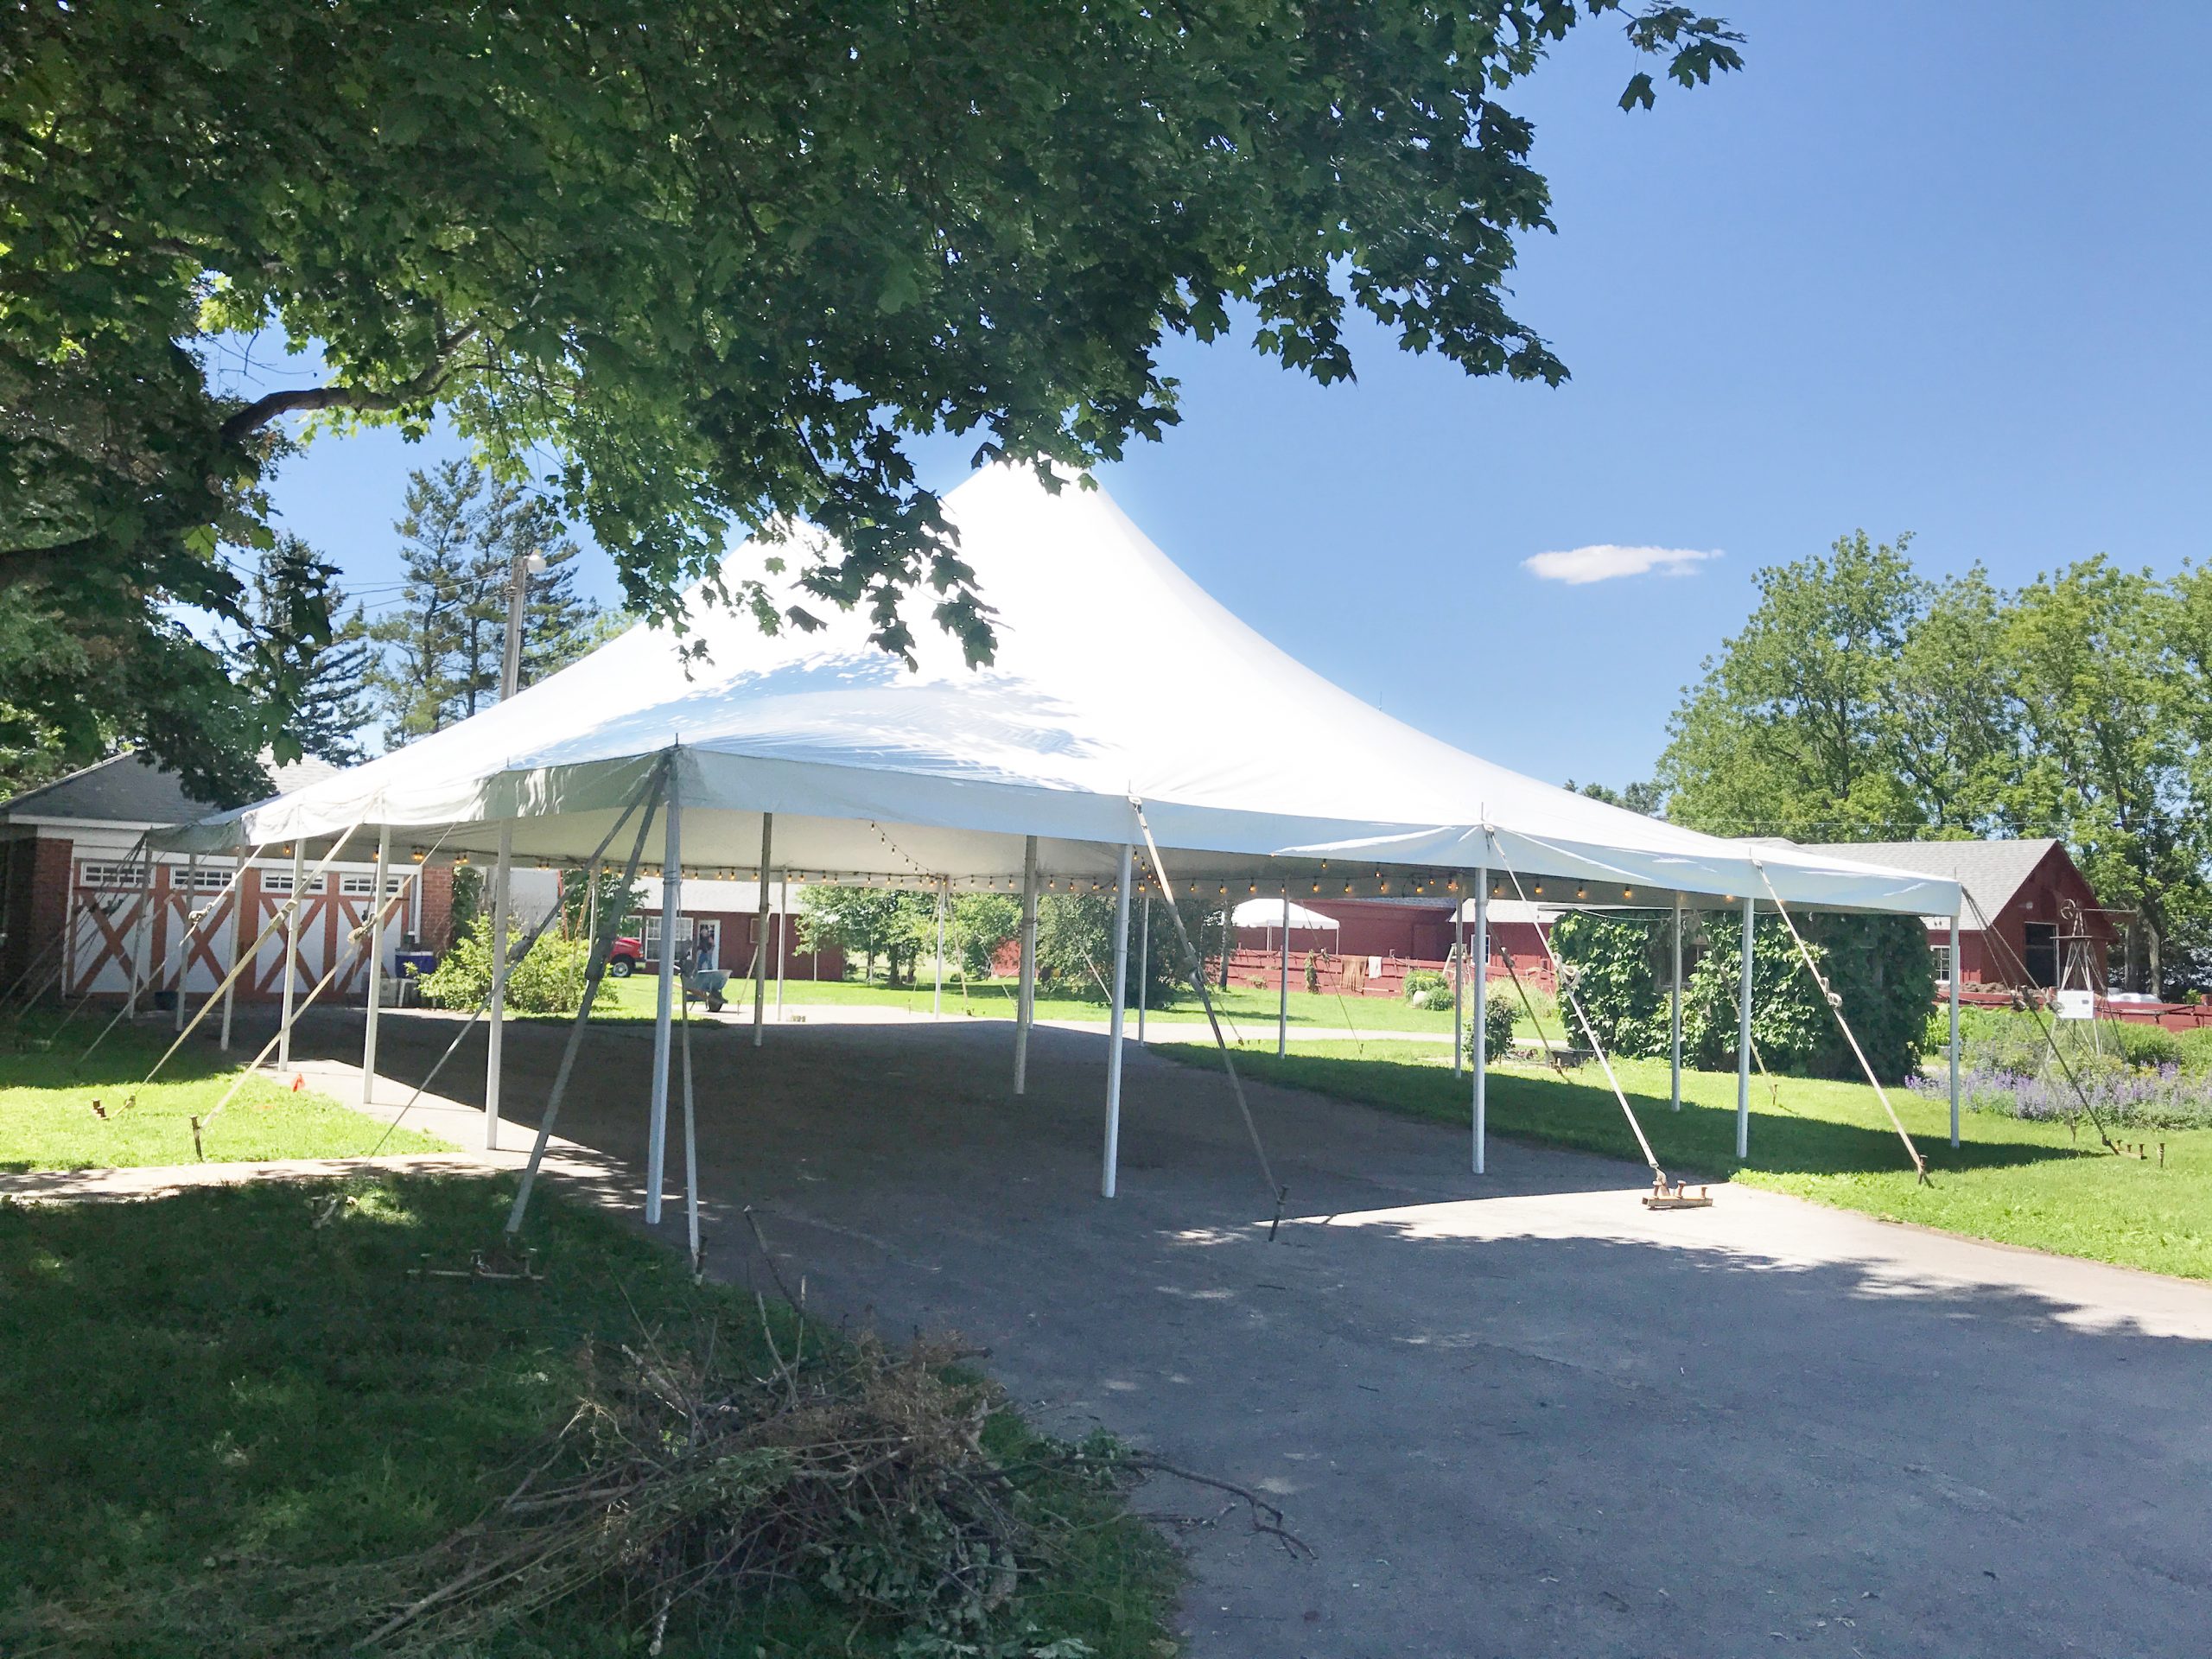 40' x 60' rope and pole wedding tent in Walcott, IA